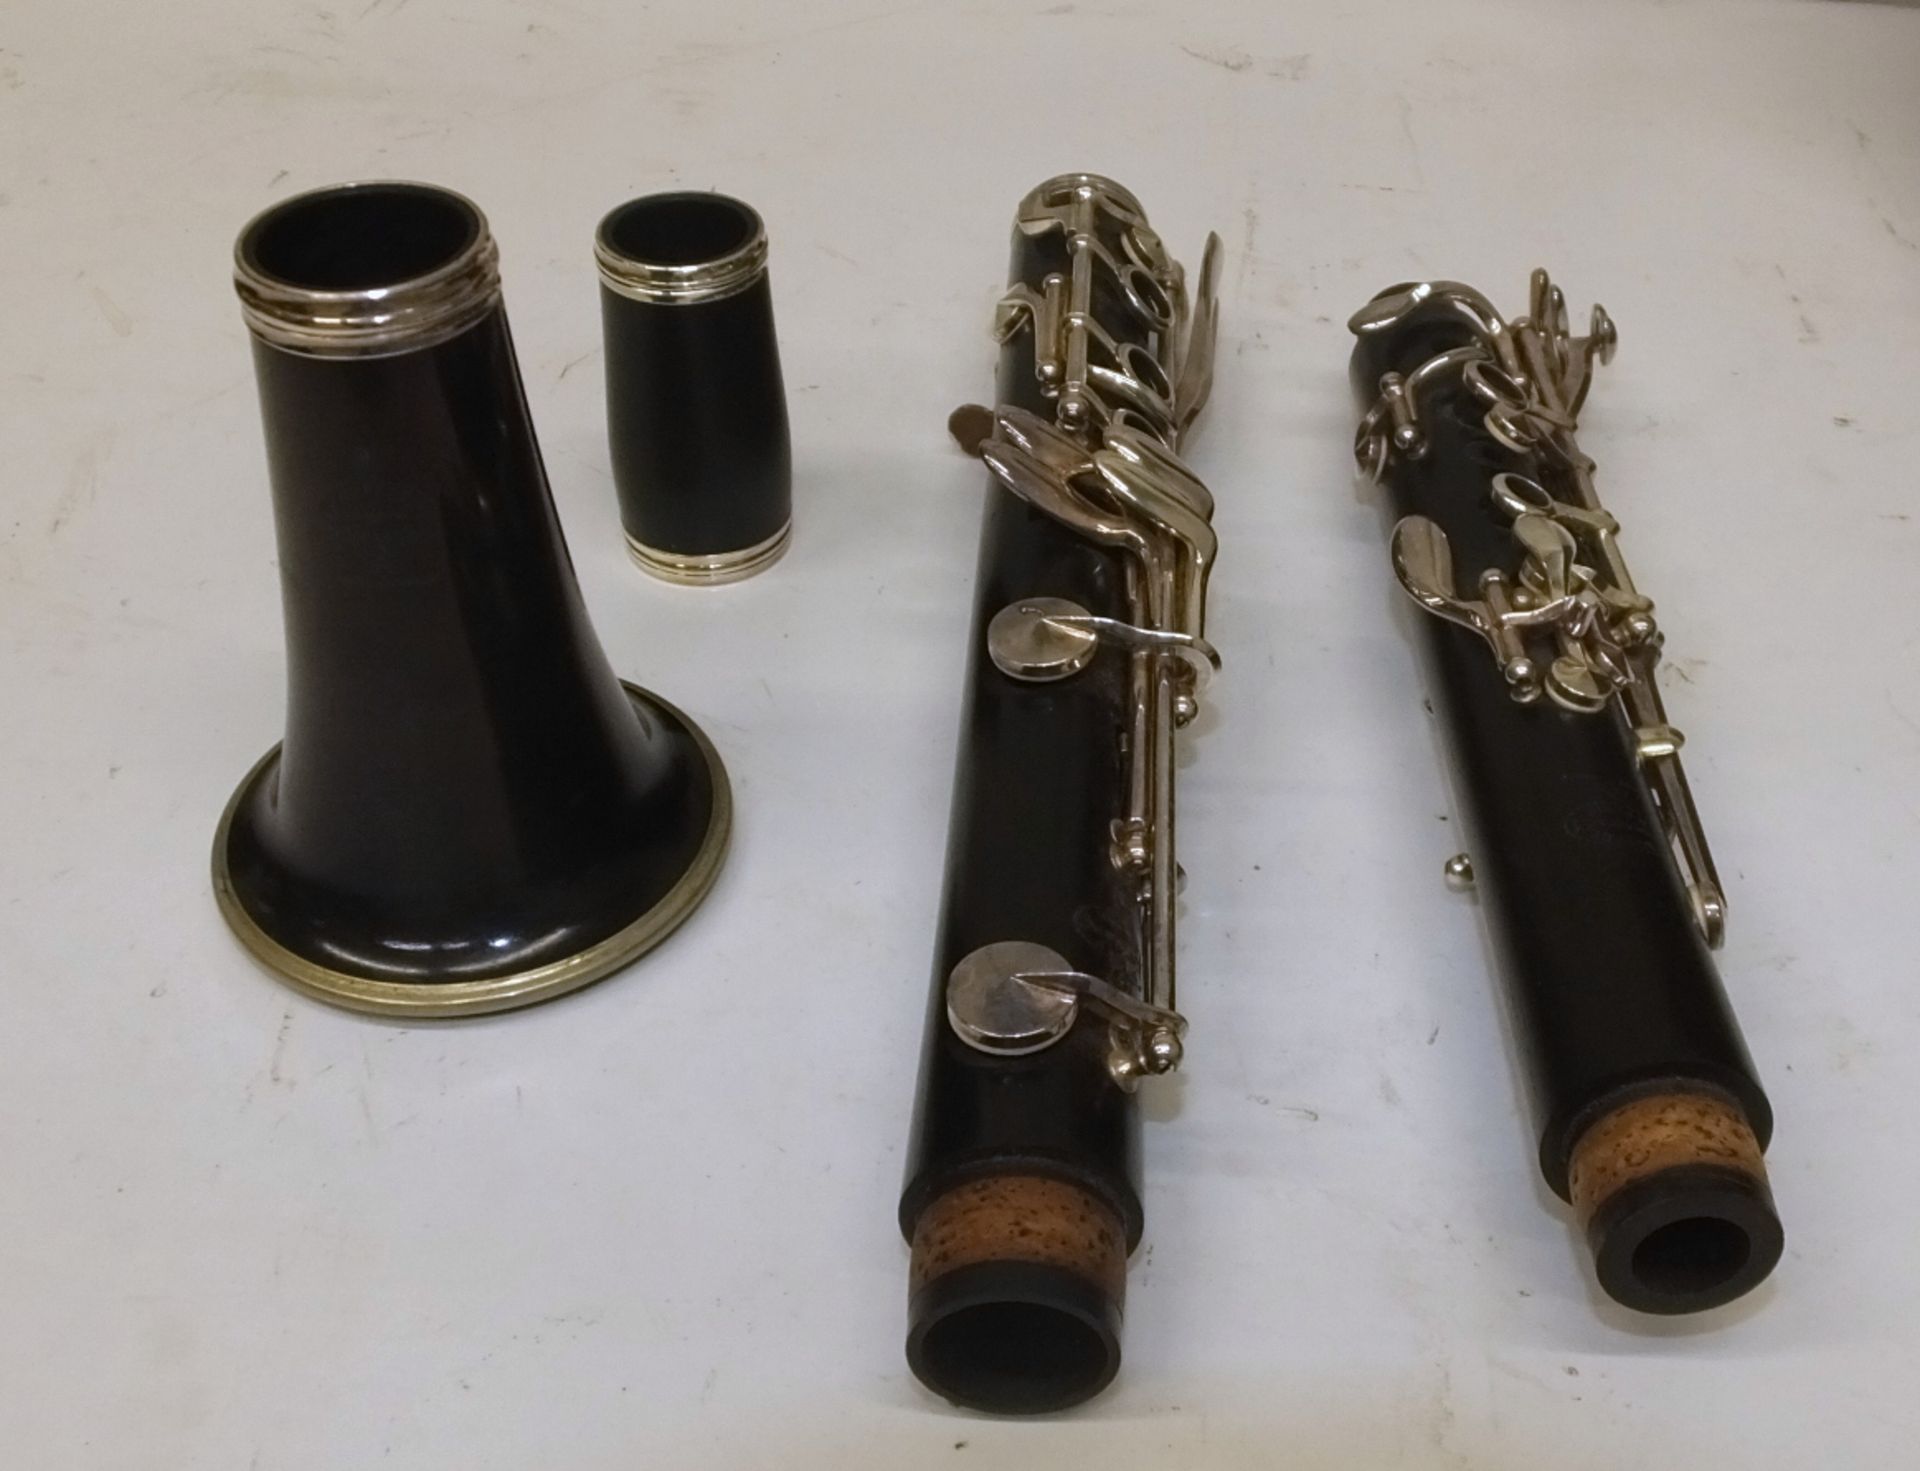 Buffet Crampon Clarinet (A) - Serial Number - 296072 - Image 2 of 10